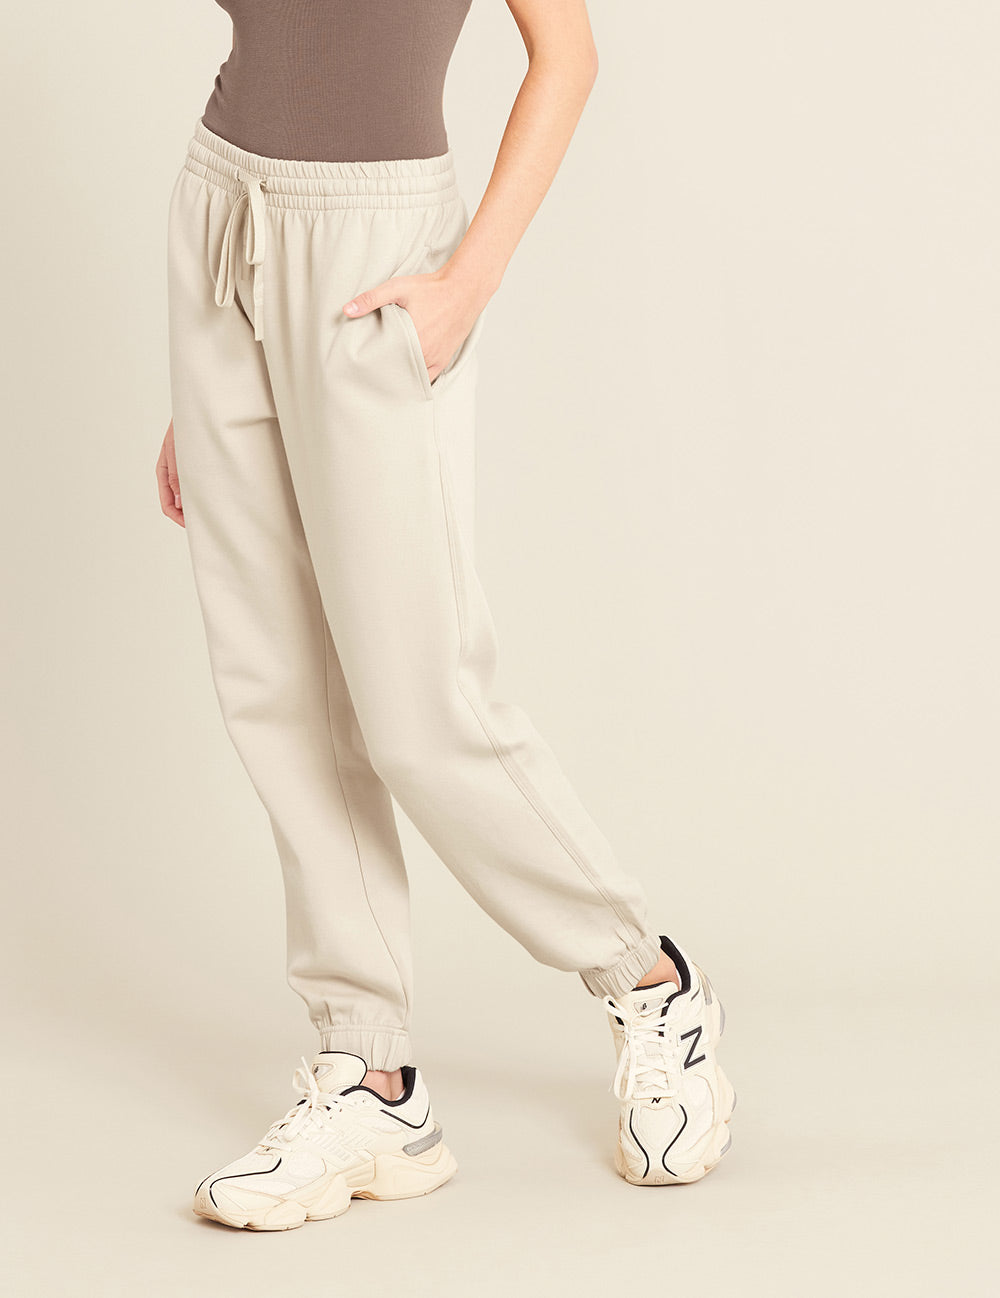 Boody Unisex Cuffed Sweat Pants by Boody Online, THE ICONIC